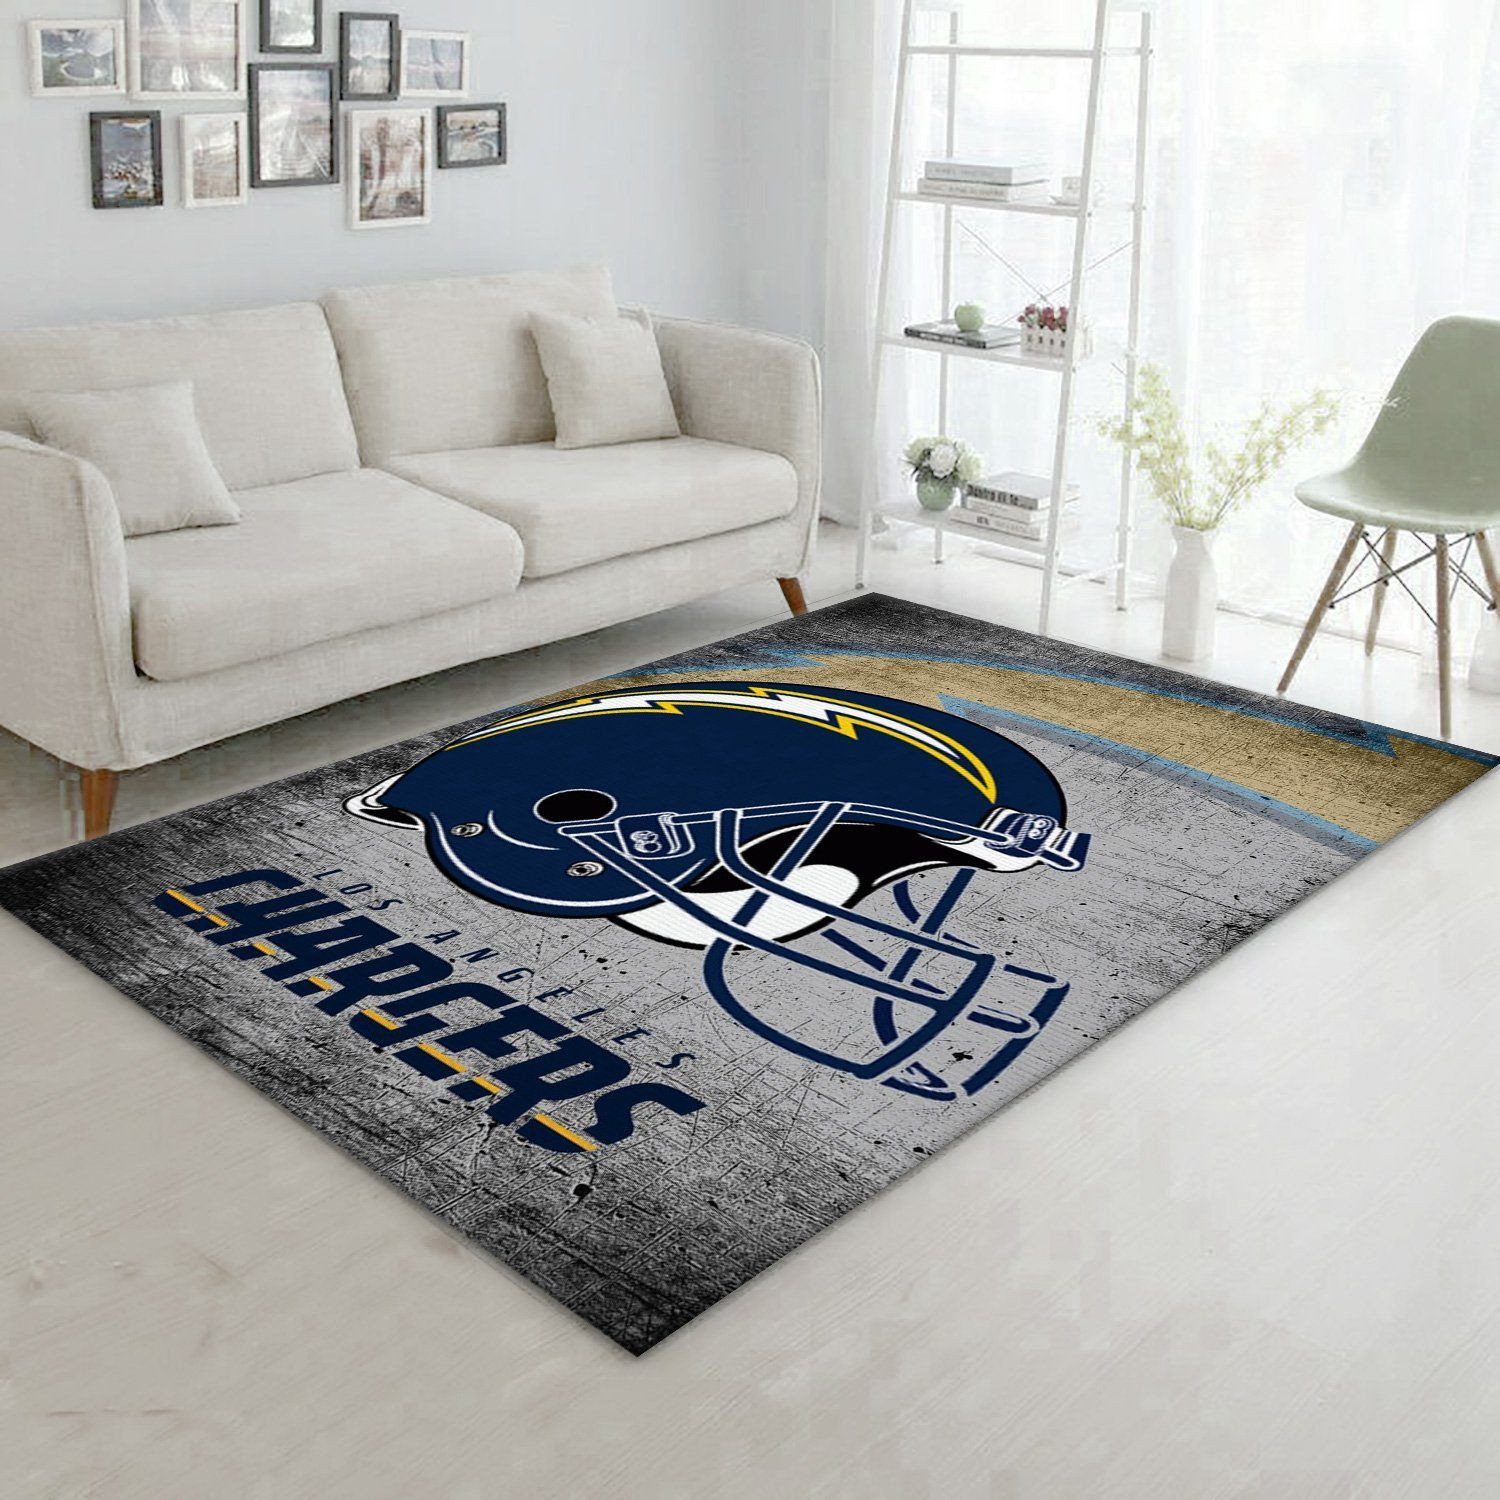 Los Angeles Chargers Nfl Rug Living Room Rug Home Decor Floor Decor - Indoor Outdoor Rugs 3